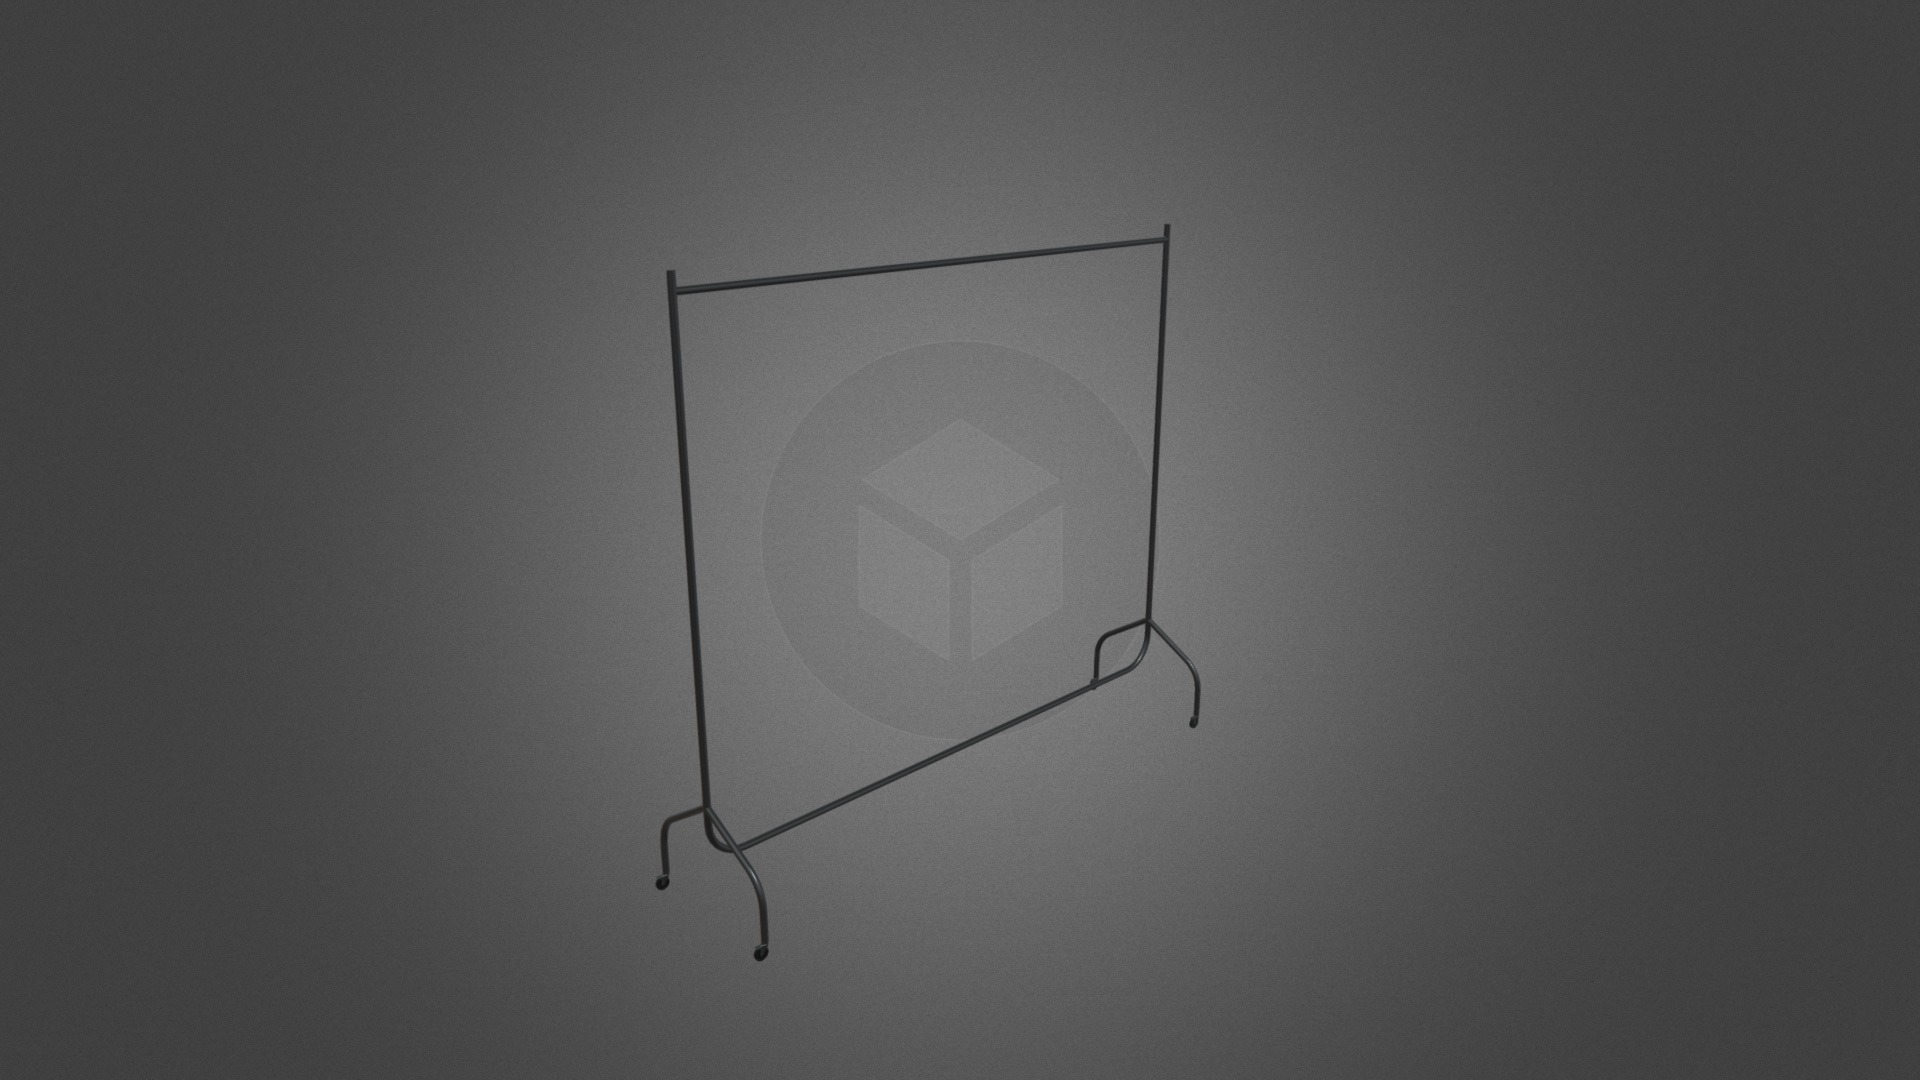 3D model Garment Rail Hire - This is a 3D model of the Garment Rail Hire. The 3D model is about a light fixture from a ceiling.